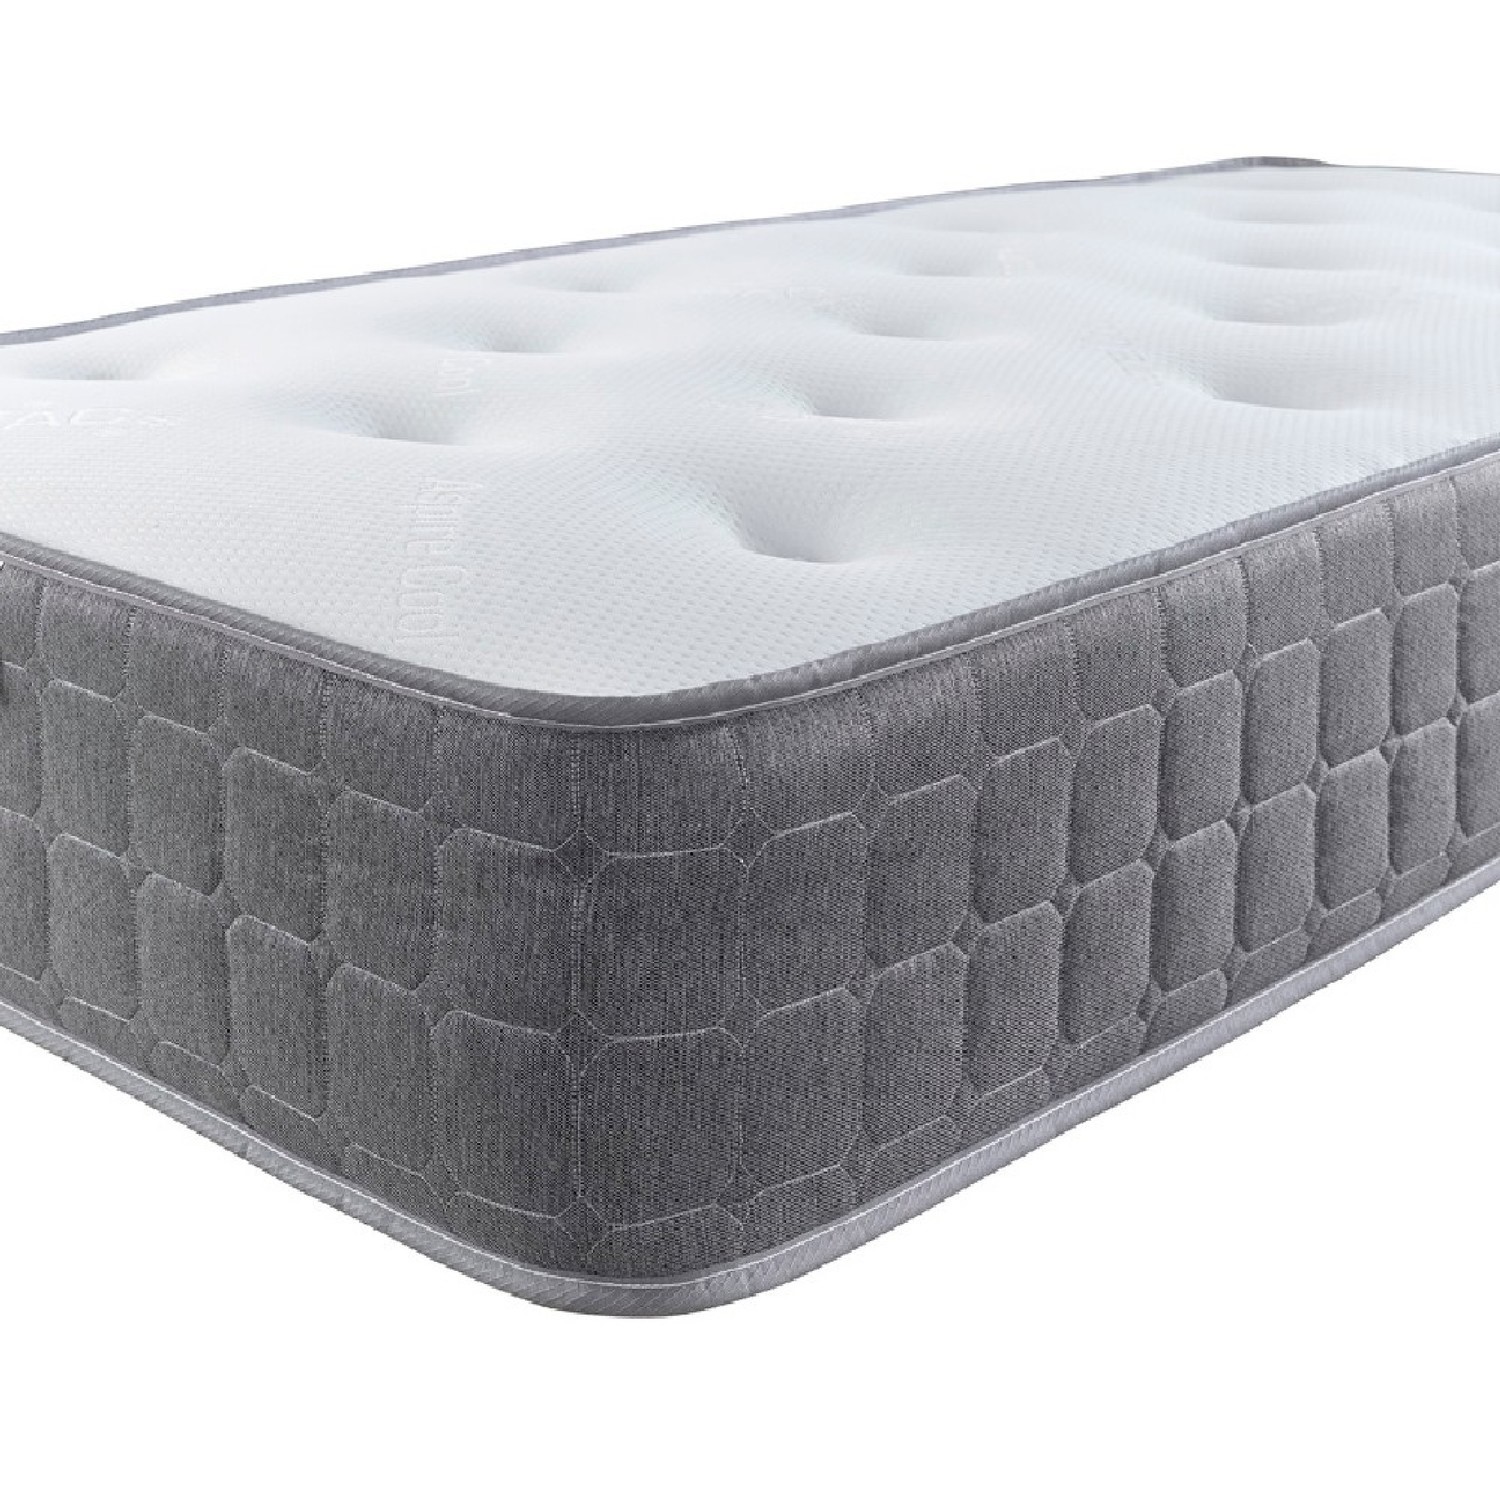 Aspire furniture quad comfort natural eco tufted spring mattress - small double